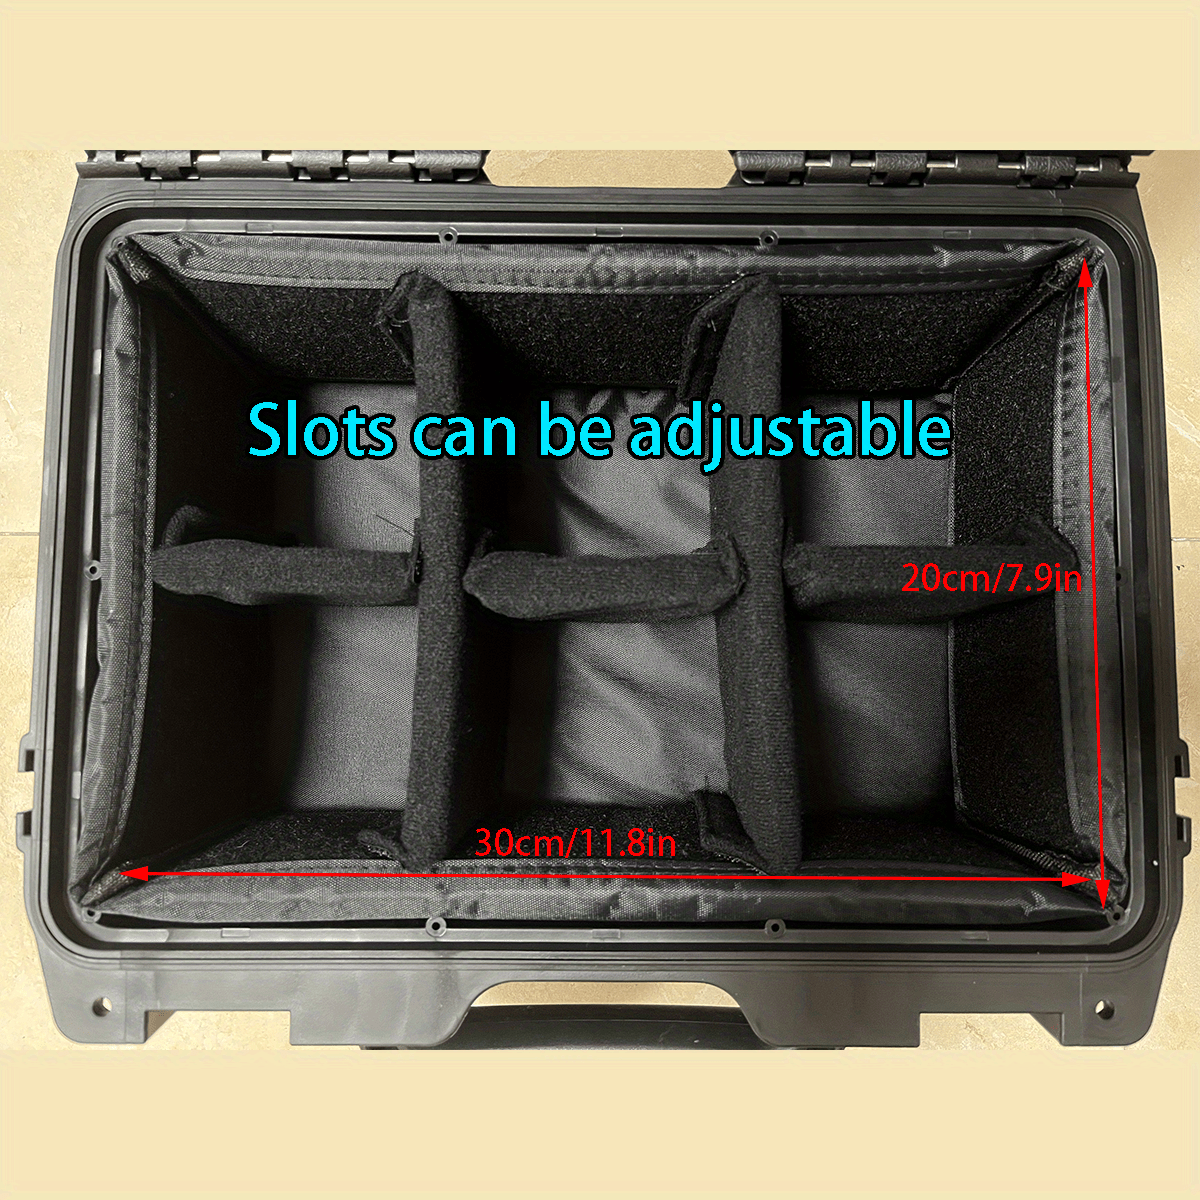 Portable 3 Layer Box Fly Fishing Storage Case Fishing Gear Strong Corrosion  Resistant Storage Box : Buy Online at Best Price in KSA - Souq is now  : Sporting Goods